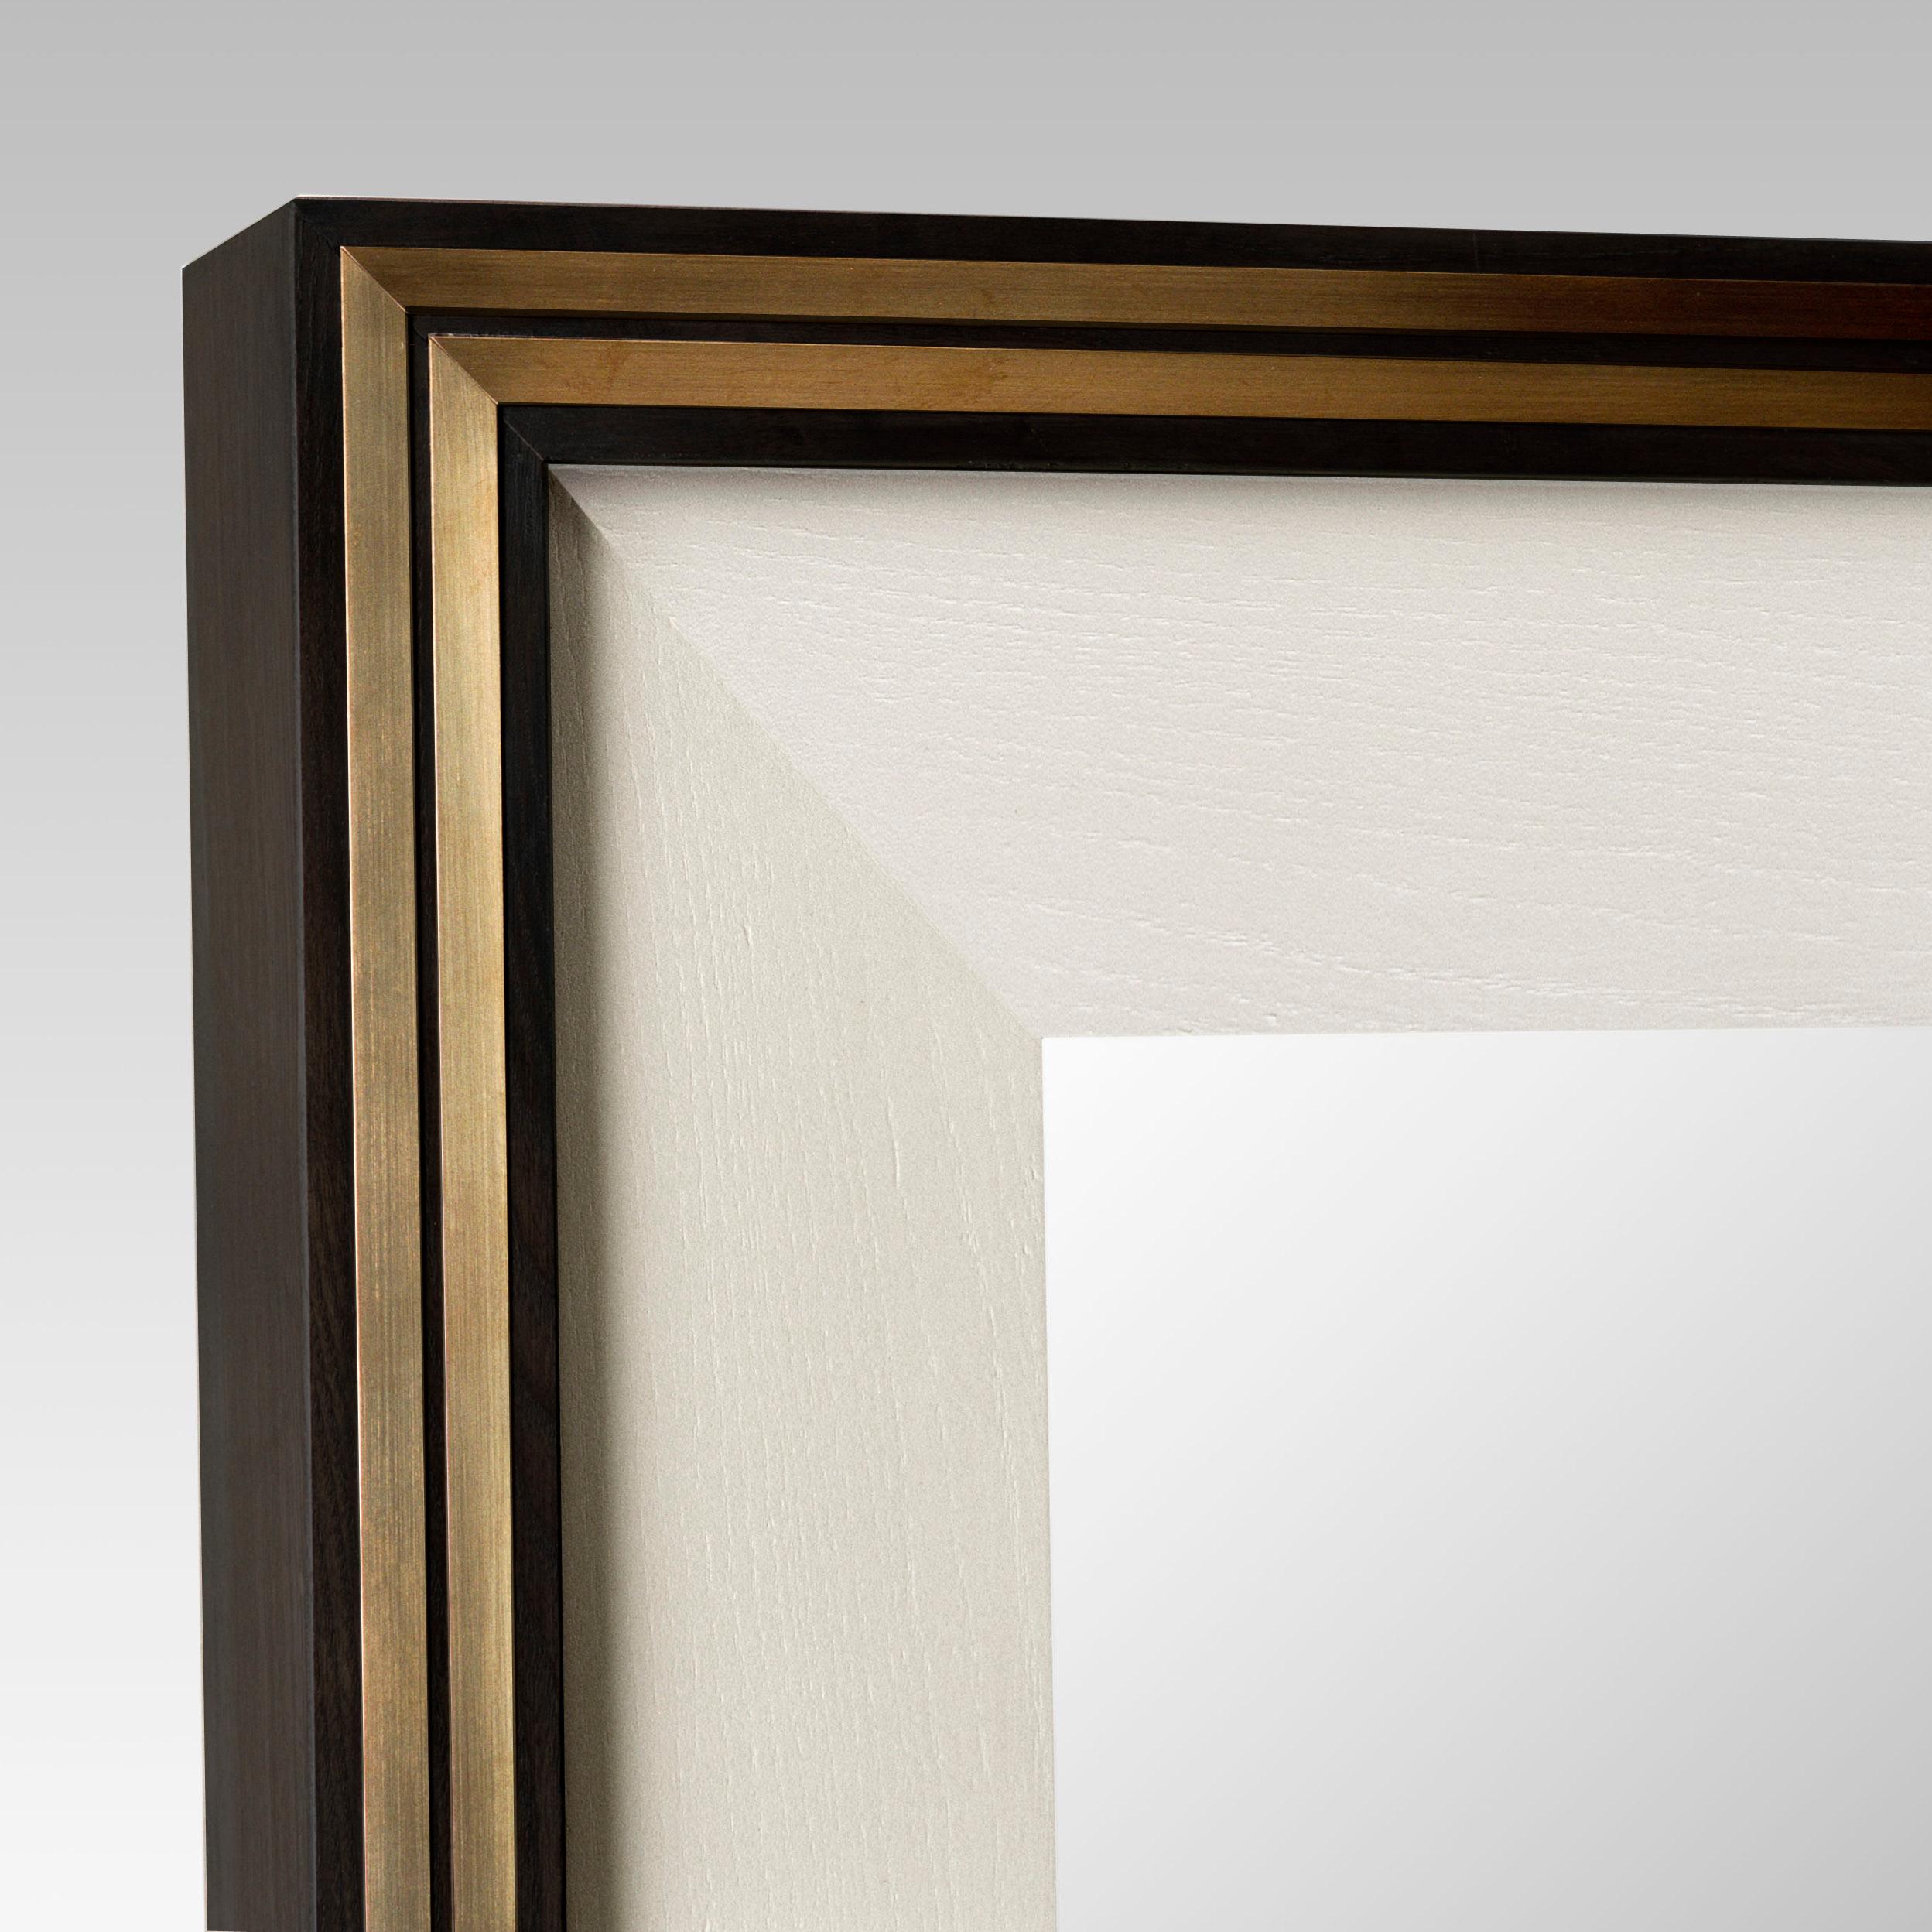 Black (RAL 9004) satin lacquered wood frame mirror with brass trim and white (RAL 9001) satin lacquered inner frame finish. 

Small: W85 x H135 x D8 cm

Regular: W140 x H220 x D8 cm

Lead time: 10 - 14 weeks

Currently in stock in the following